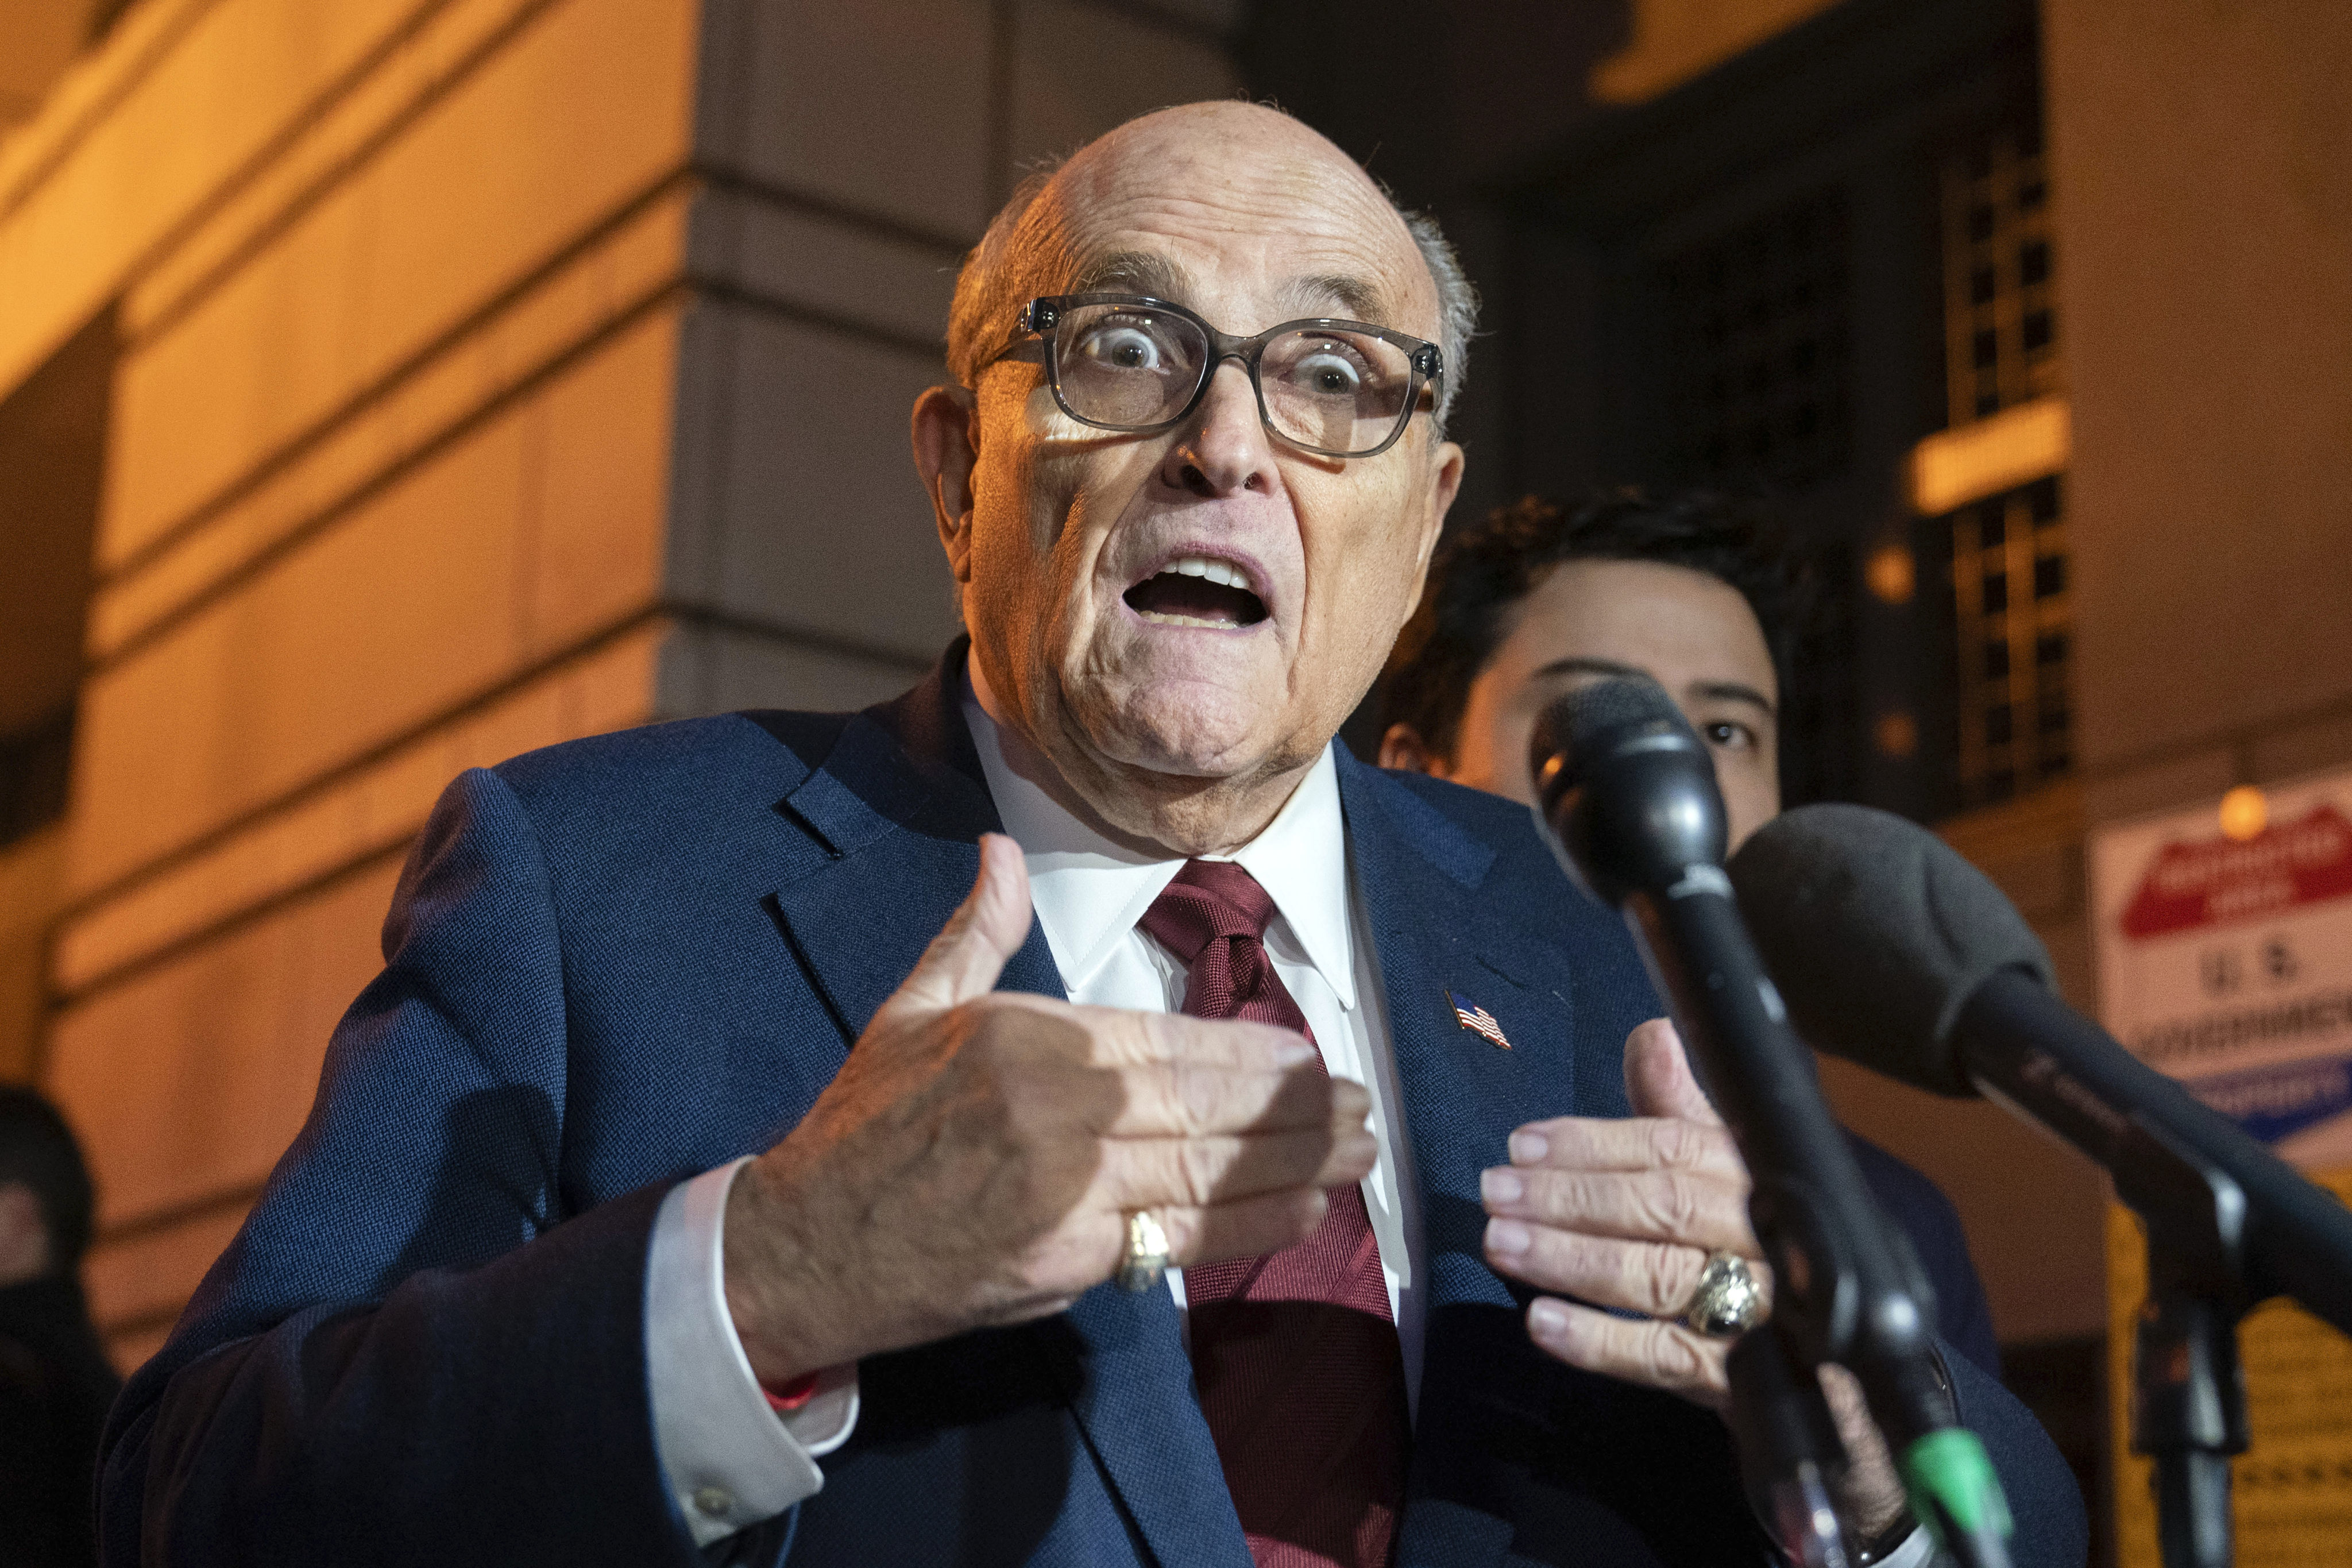 Former New York mayor Rudy Giuliani after leaving the federal courthouse in Washington, on December 11. Photo: AP